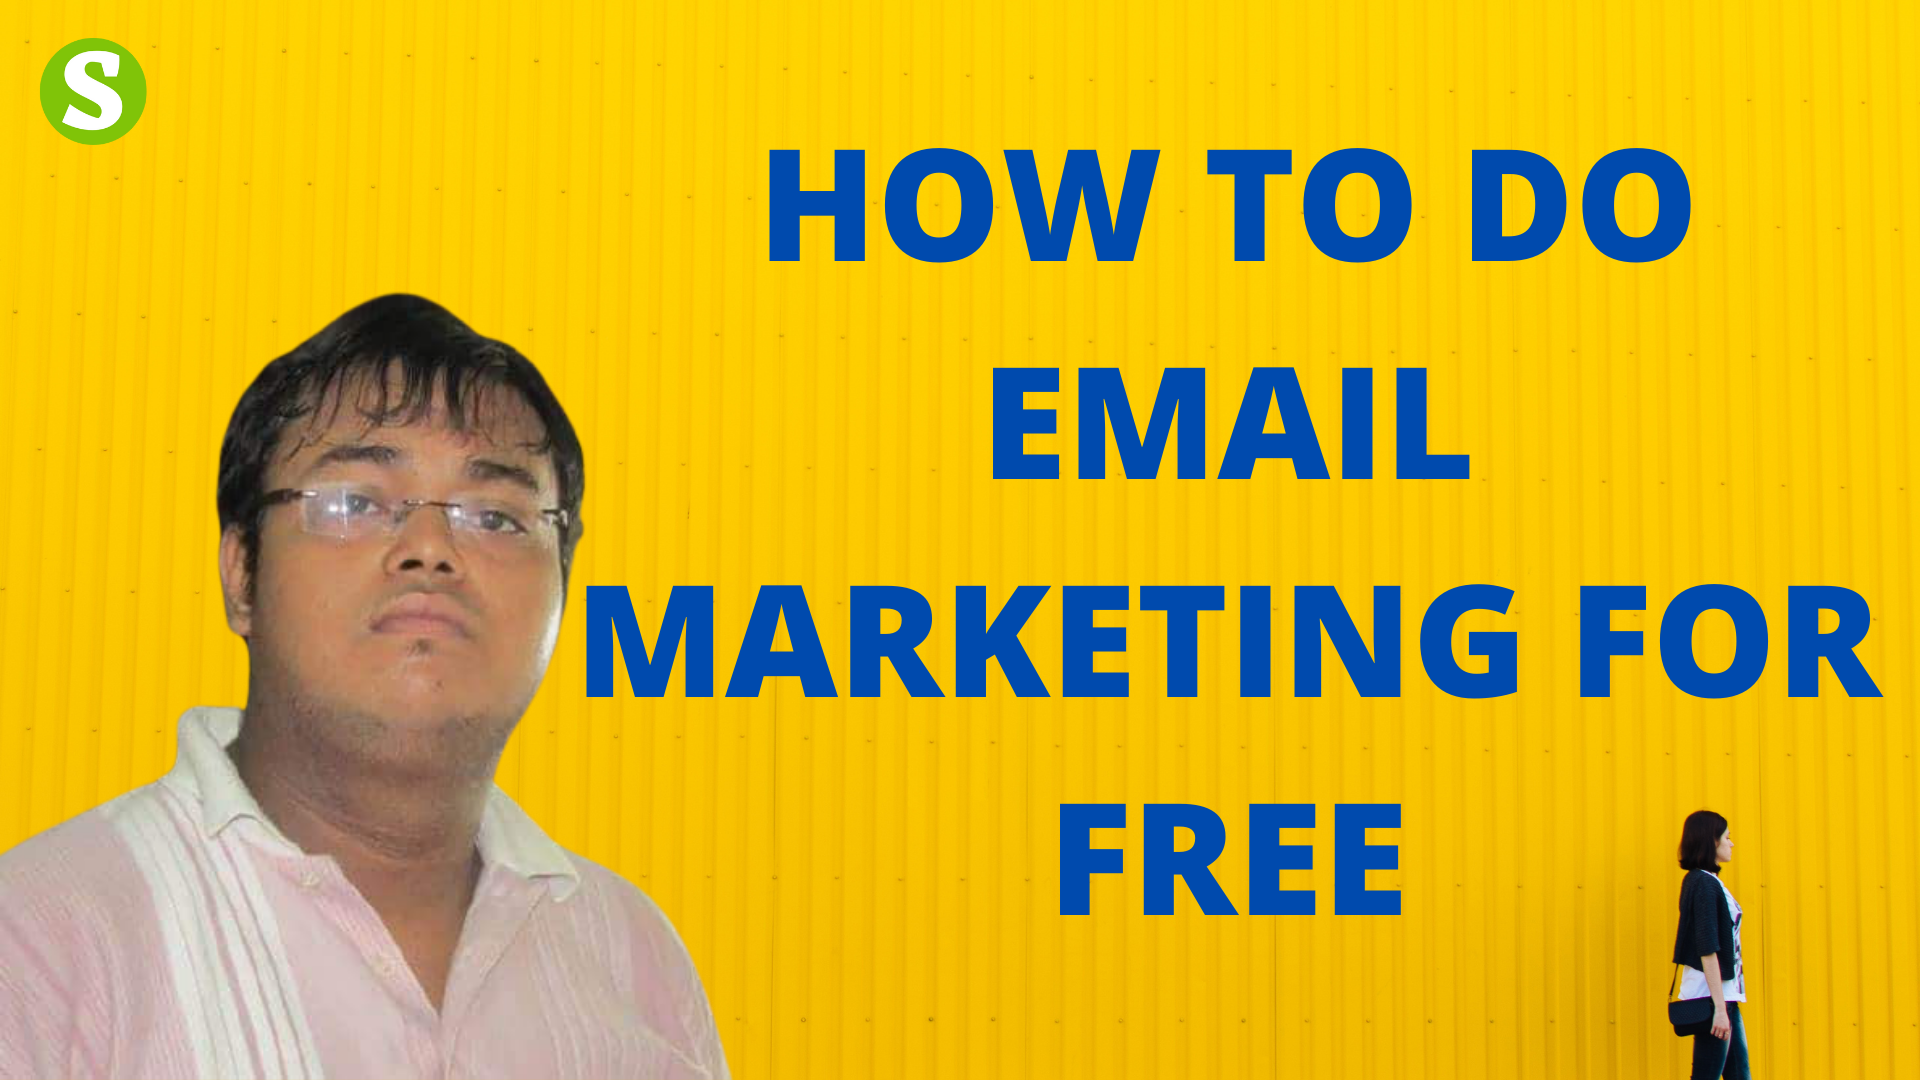 How To Do Email Marketing For Free